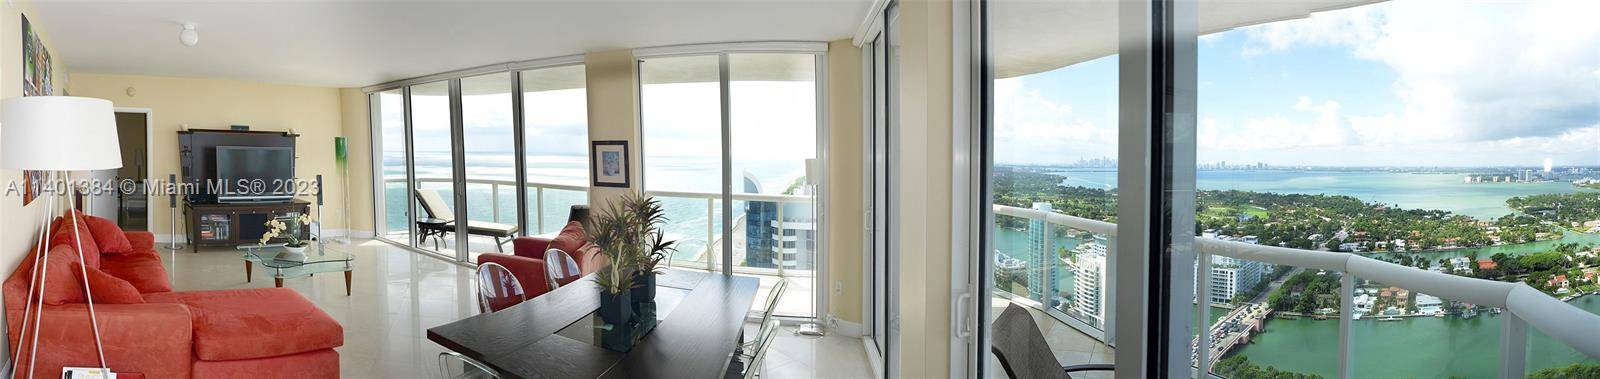 BEACHFRONT SPECTACULAR 260 DEGREE VIEW OF CITY, OCEAN BAY FULY FURNISHED TENNIS, PUTTING, RAQUET COURT, OCEAN VIEW PROFESSIONAL GYM, SAUNA, MASSAGE ROOMS, MEETING ROOMS, BEACH SERVICES, LOUNGUES UNMBRELLAS ASSIGNED PARKING ...